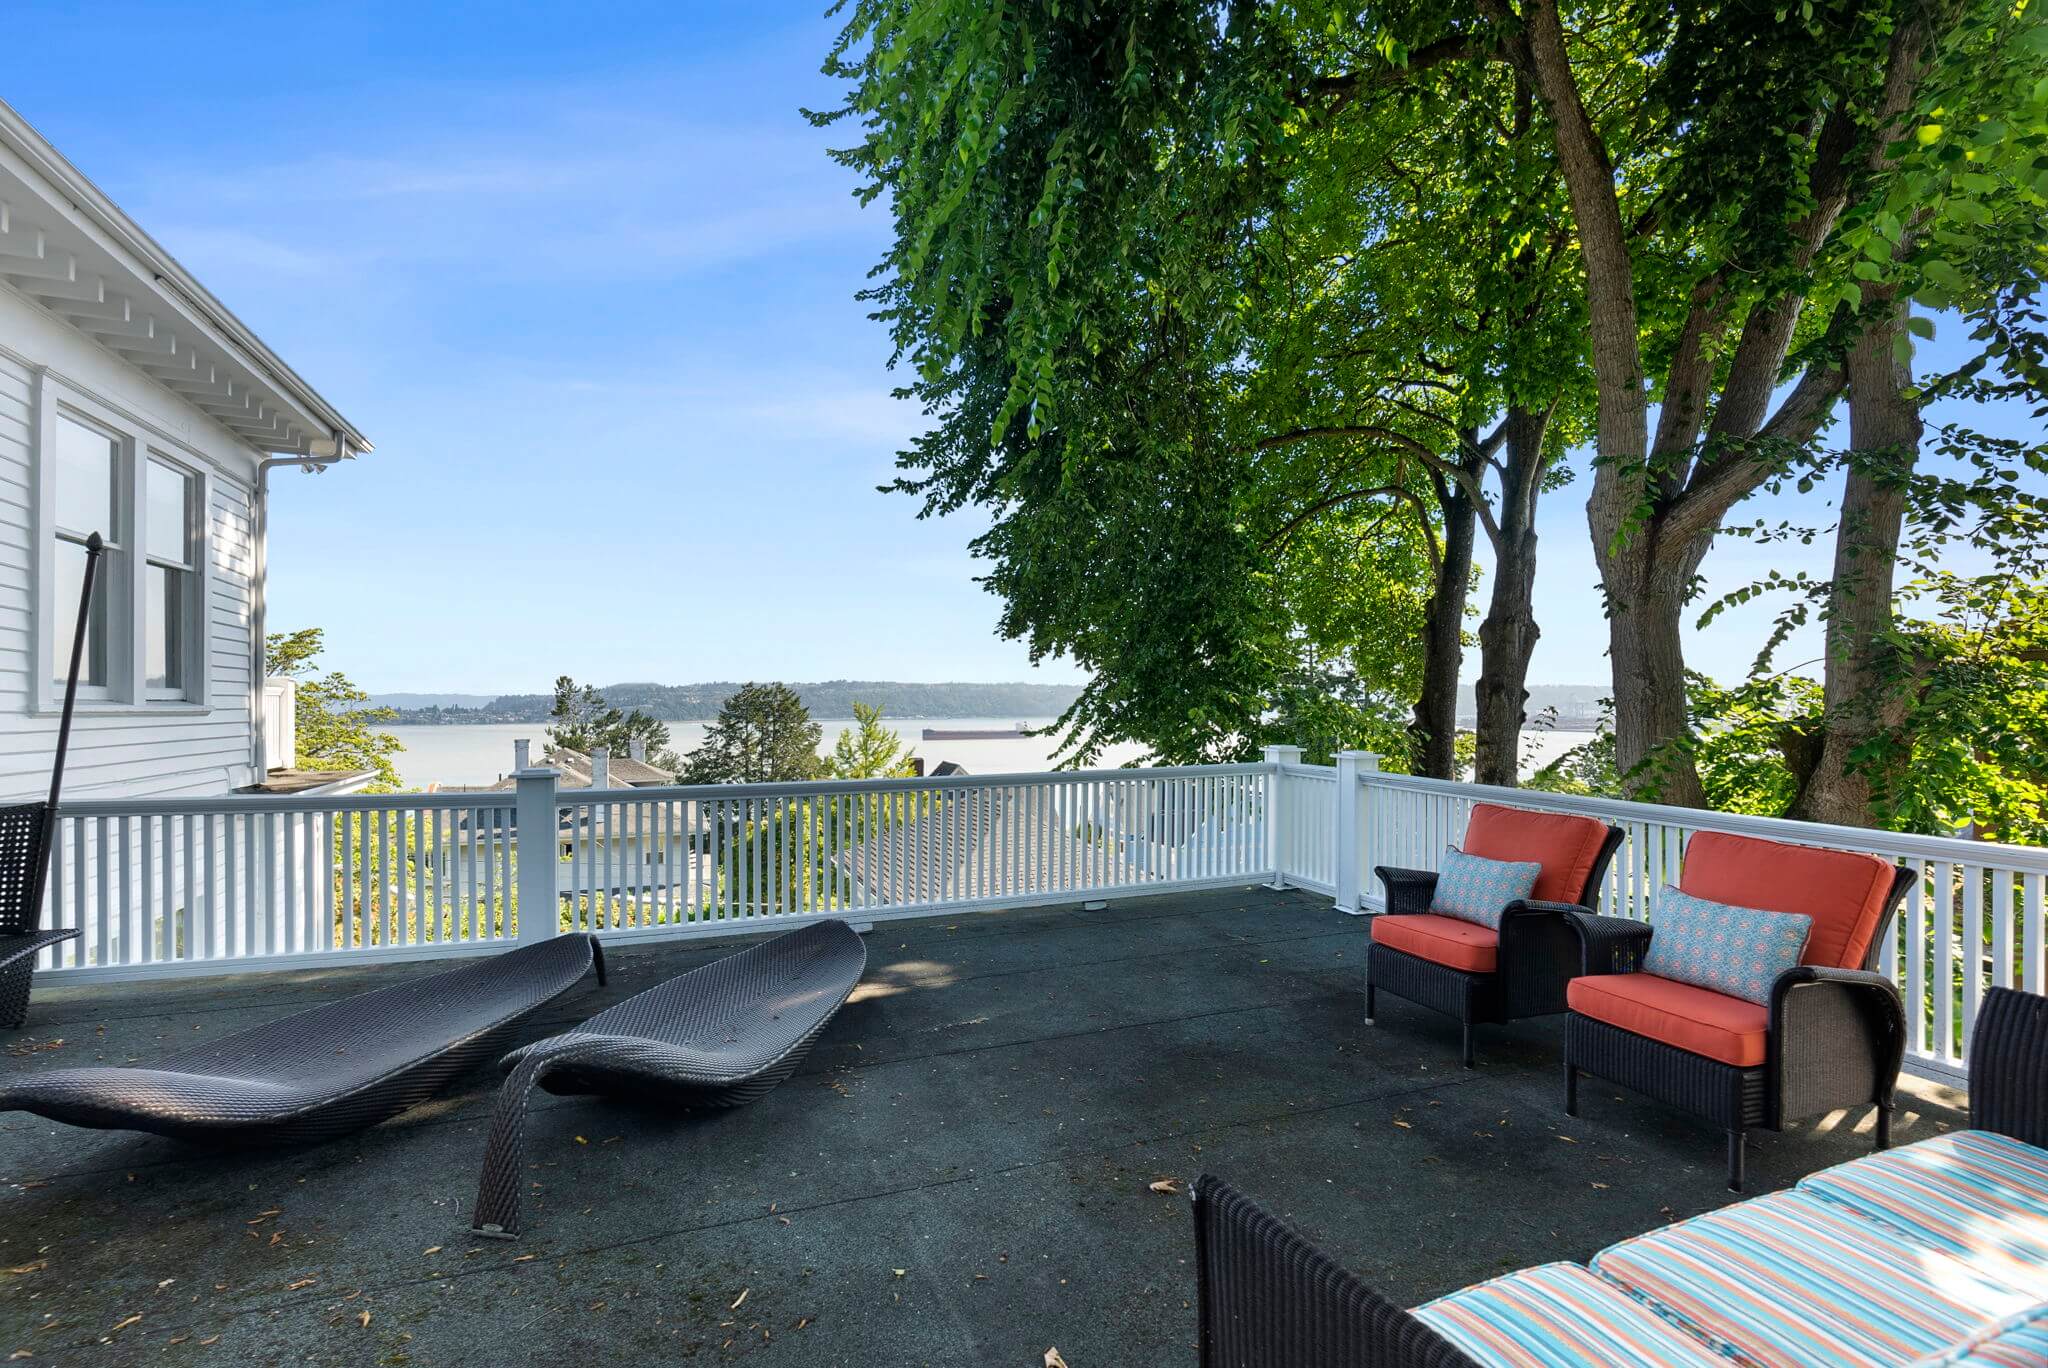 Roof top deck over the porte-cochere offers spectacular views